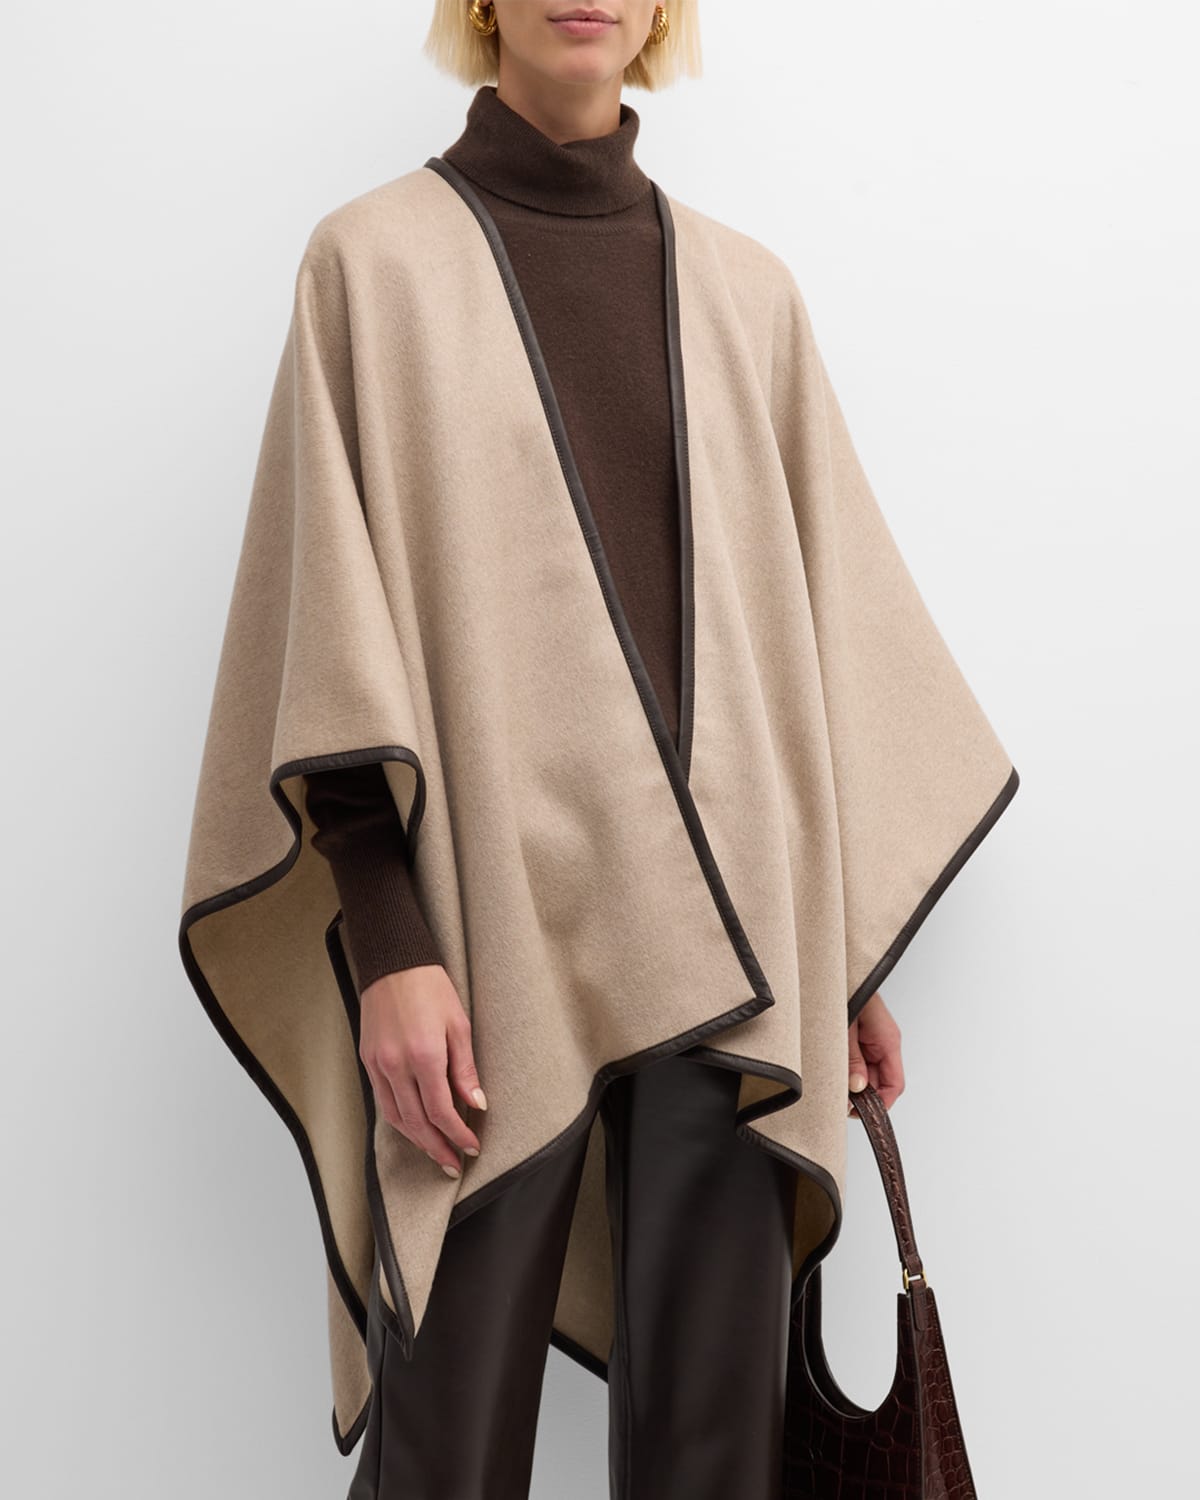 Sofia Cashmere Women's Reversible Leather-trimmed Cashmere Cape In Taupeoatmeal